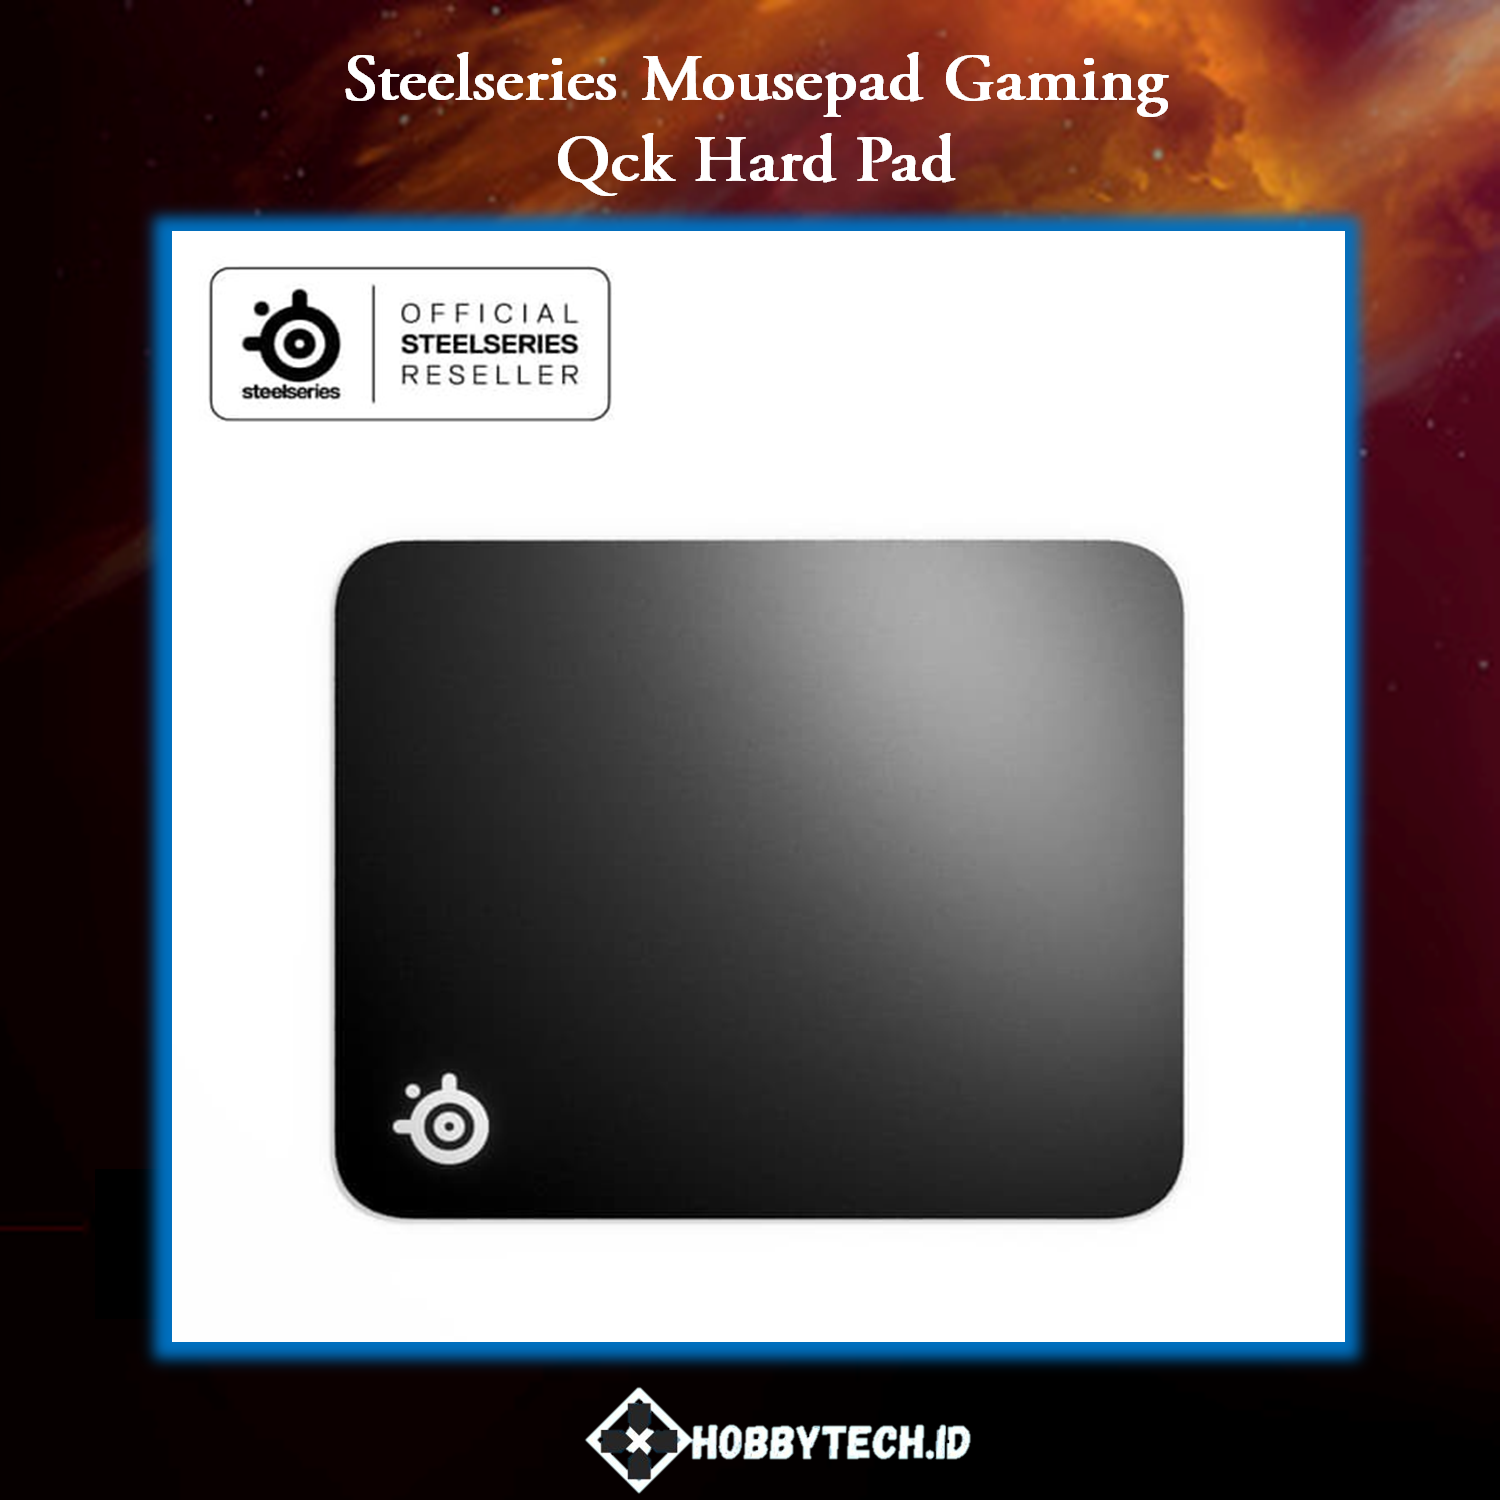 Steelseries Qck Hard Pad Gaming Mouse Pad